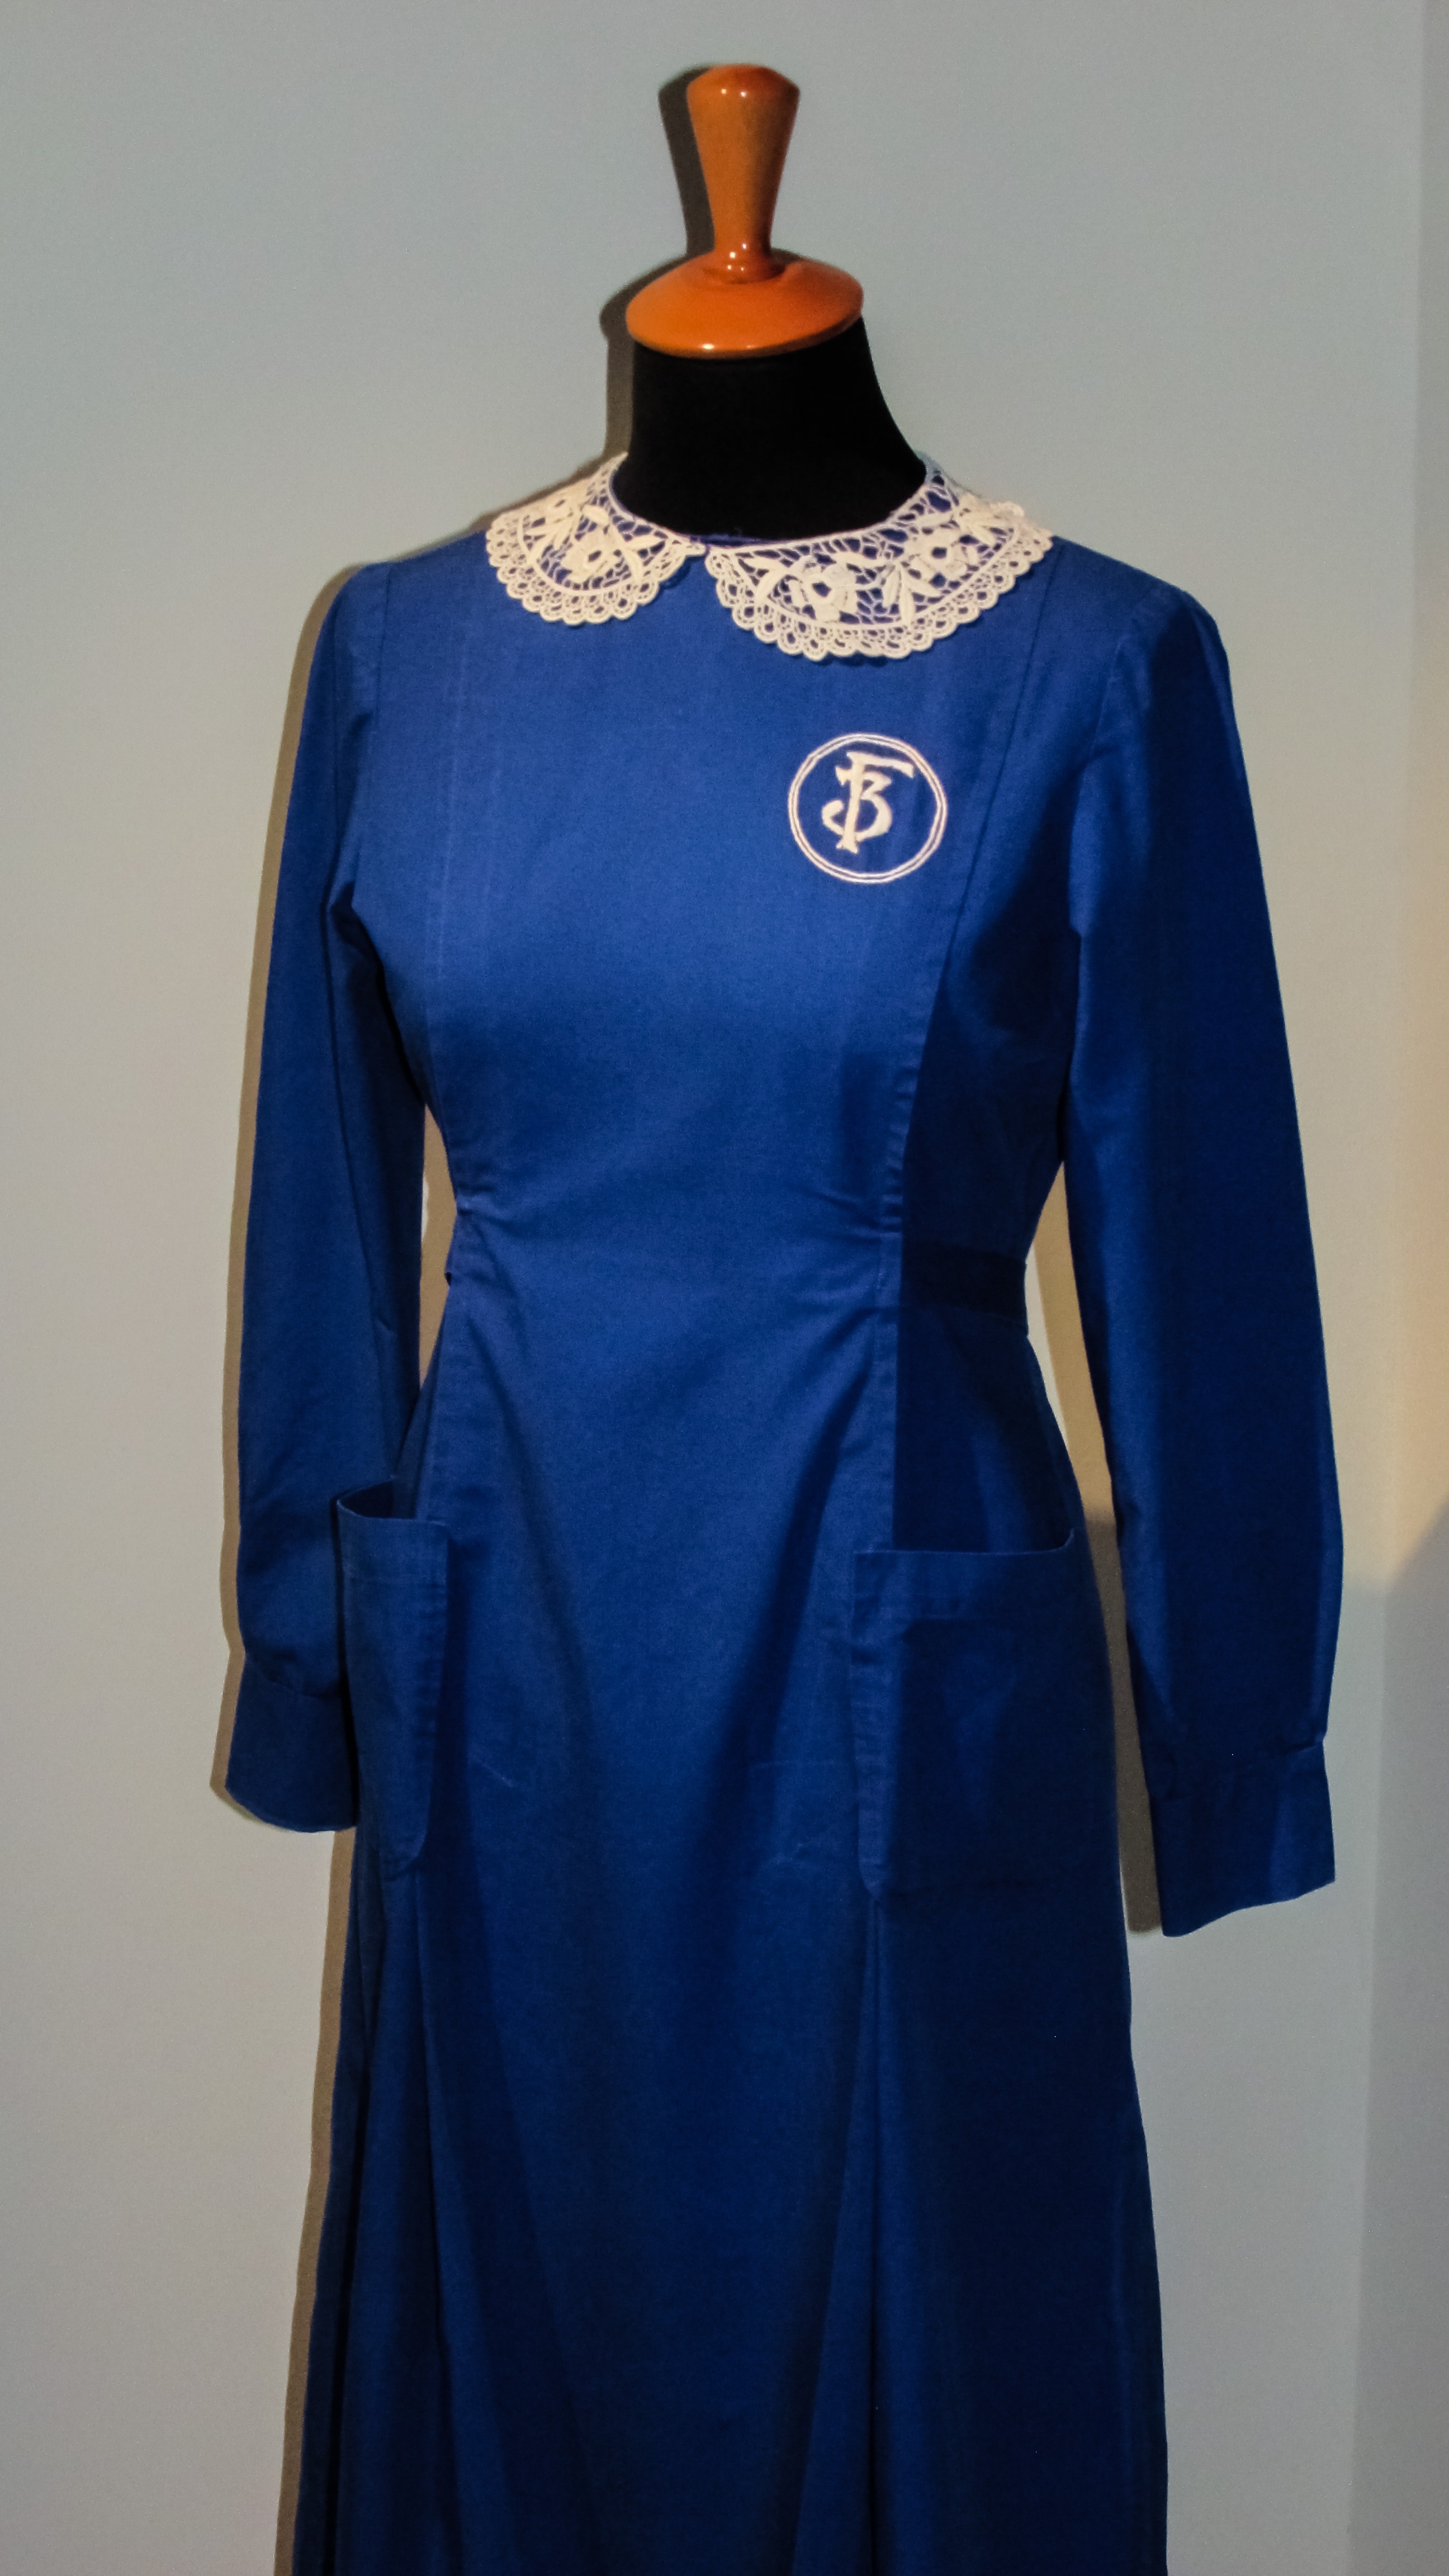 navy satin long sleeve dress with white lace collar